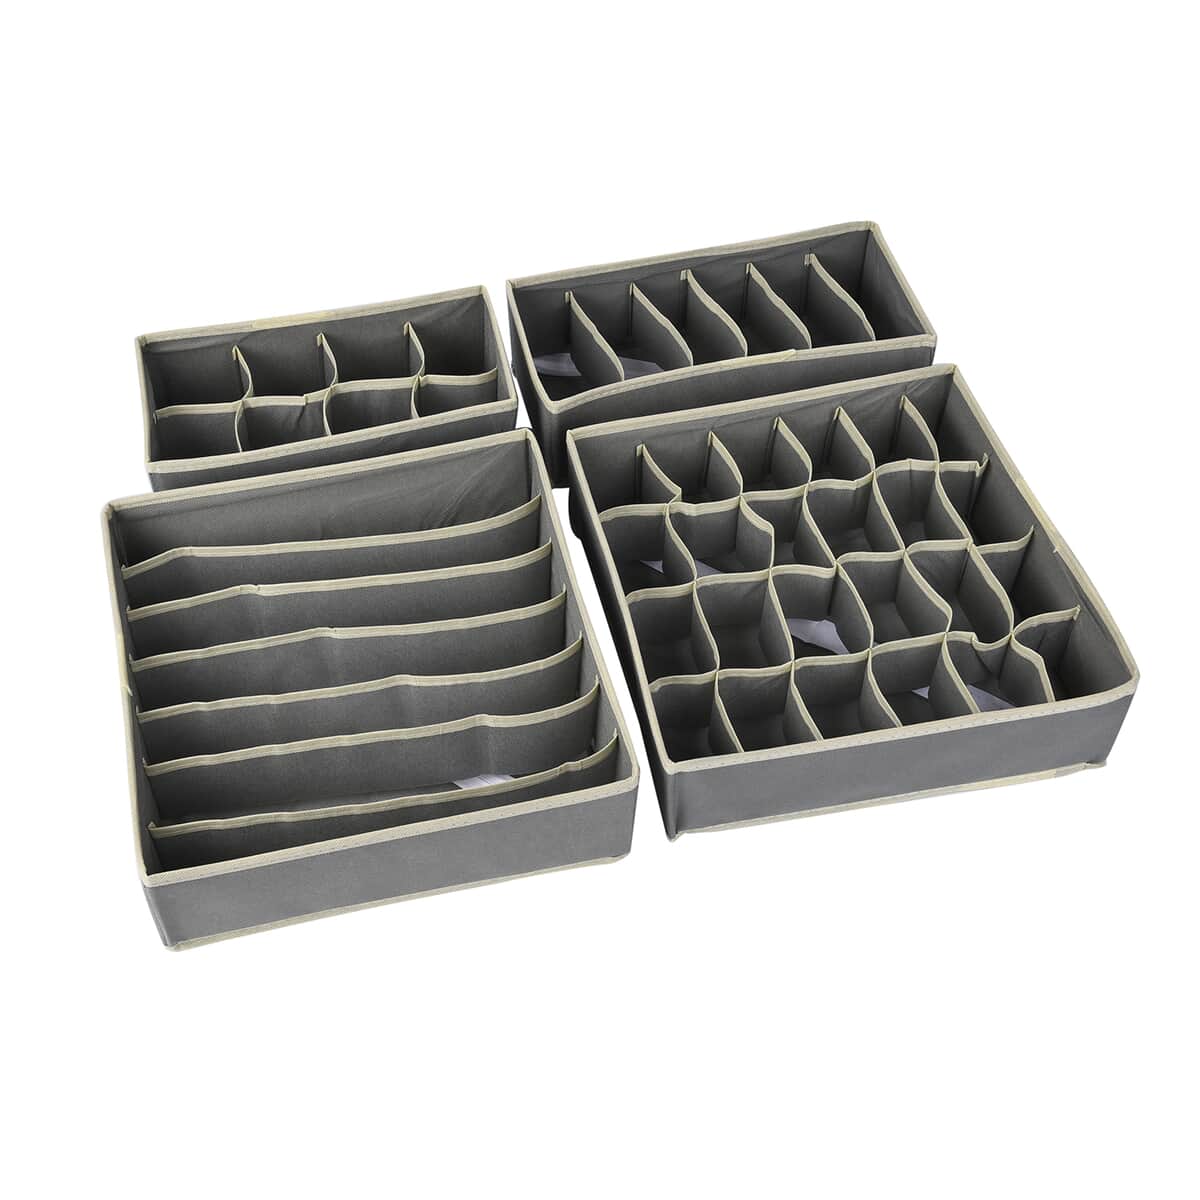 Set of 4 Gray Non-Woven Storage Organizers image number 0